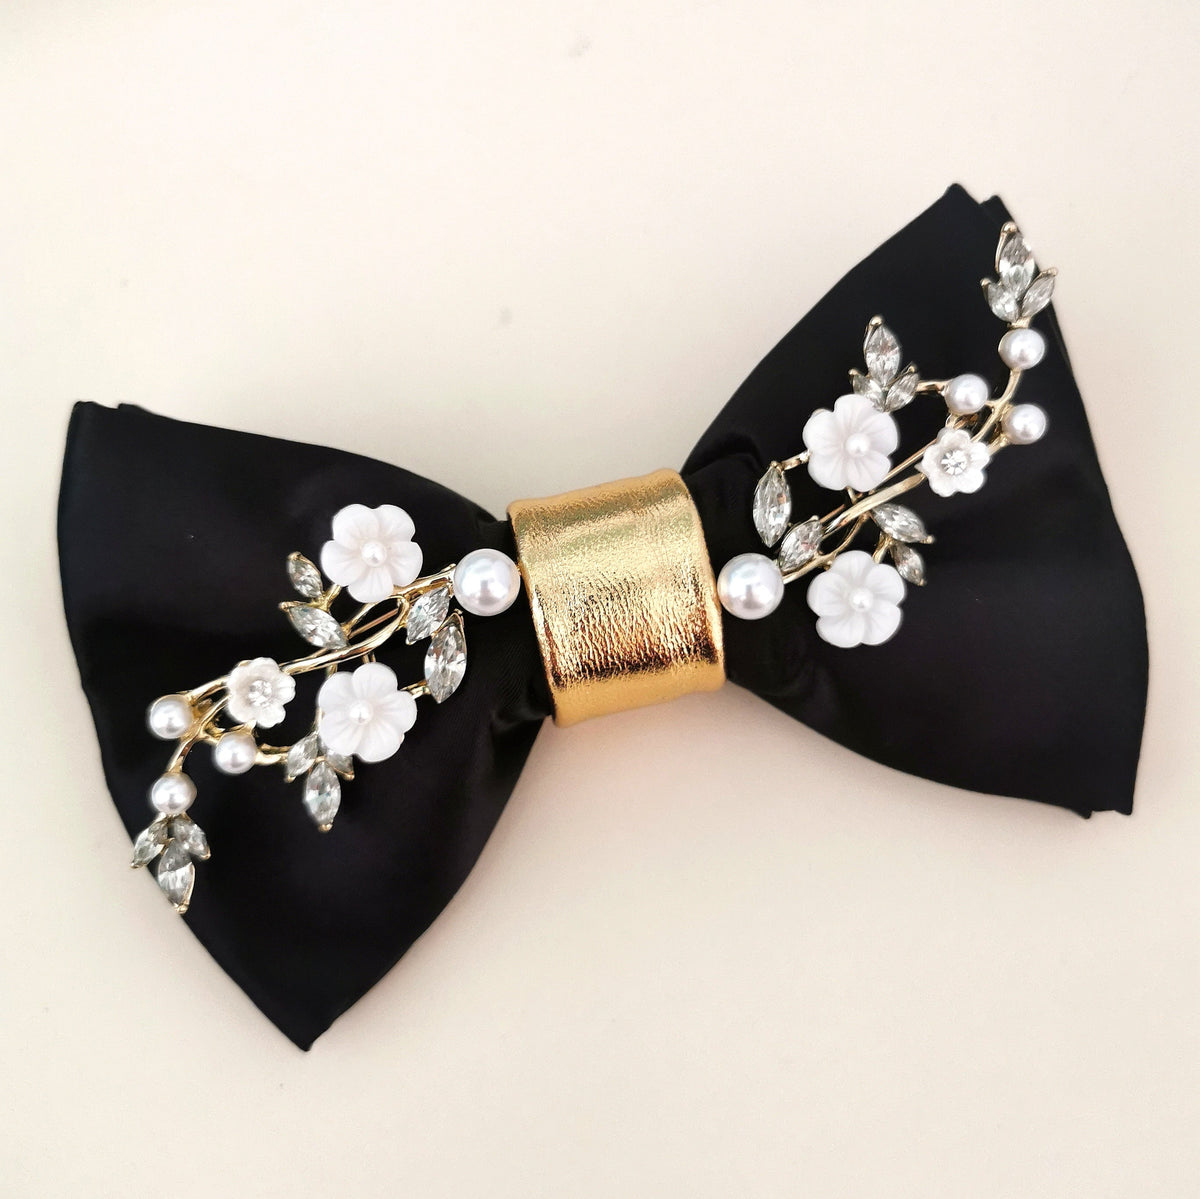 mens bow tie with crystals, black and gold bow tie, black satin bow tie, black wedding bow tie, groomsmen bow tie,